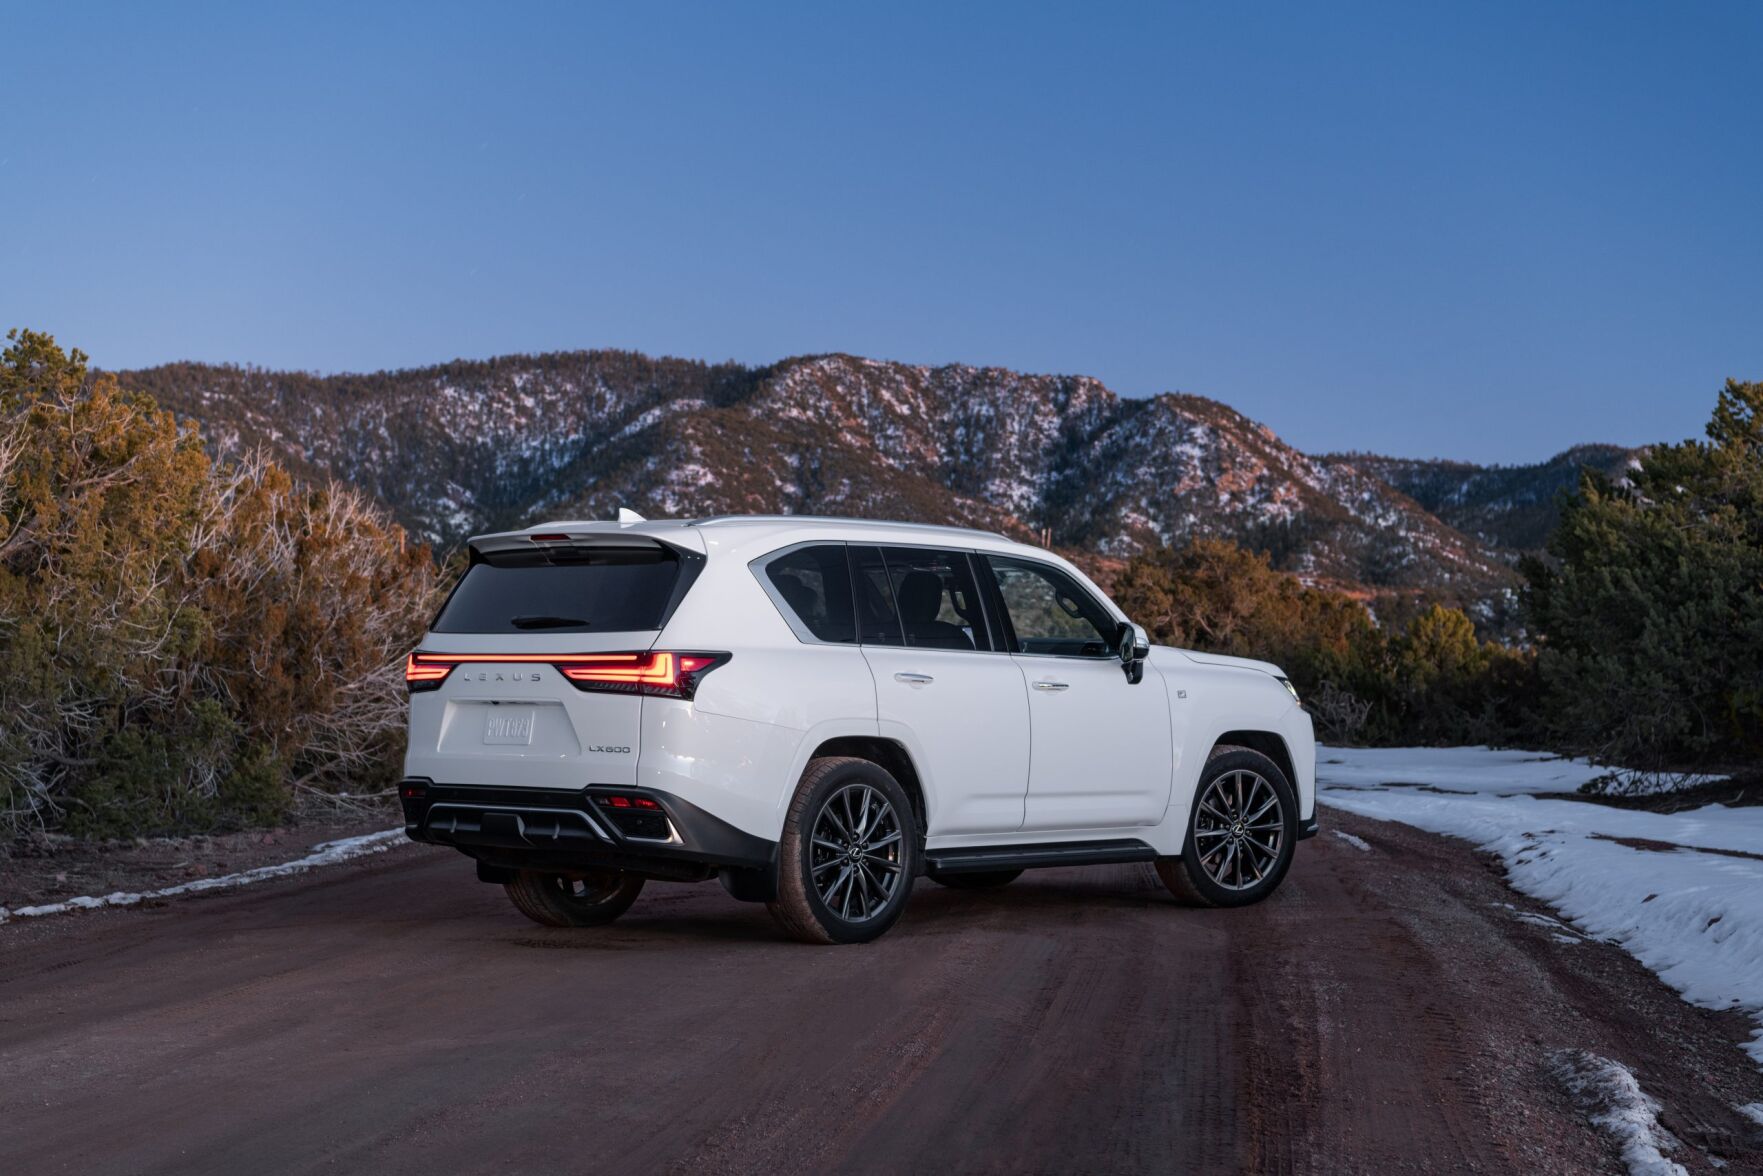 Car review: 2023 Lexus LX600: A genuinely rugged luxury SUV